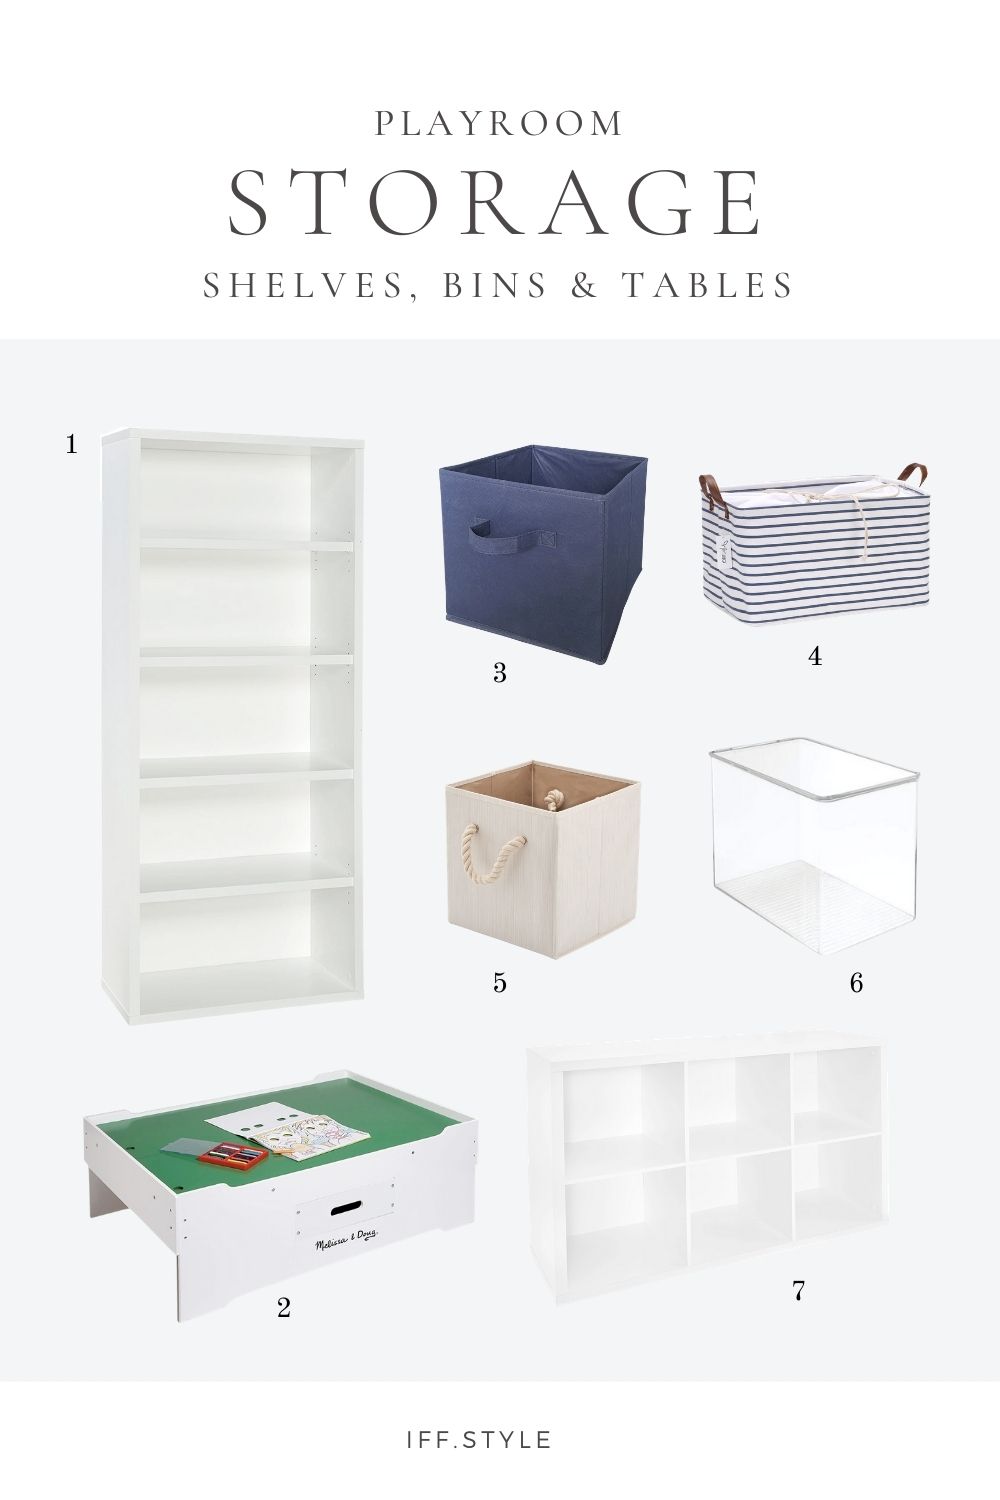 HD-Playroom Pinterest Pin Collage storage table shelves.